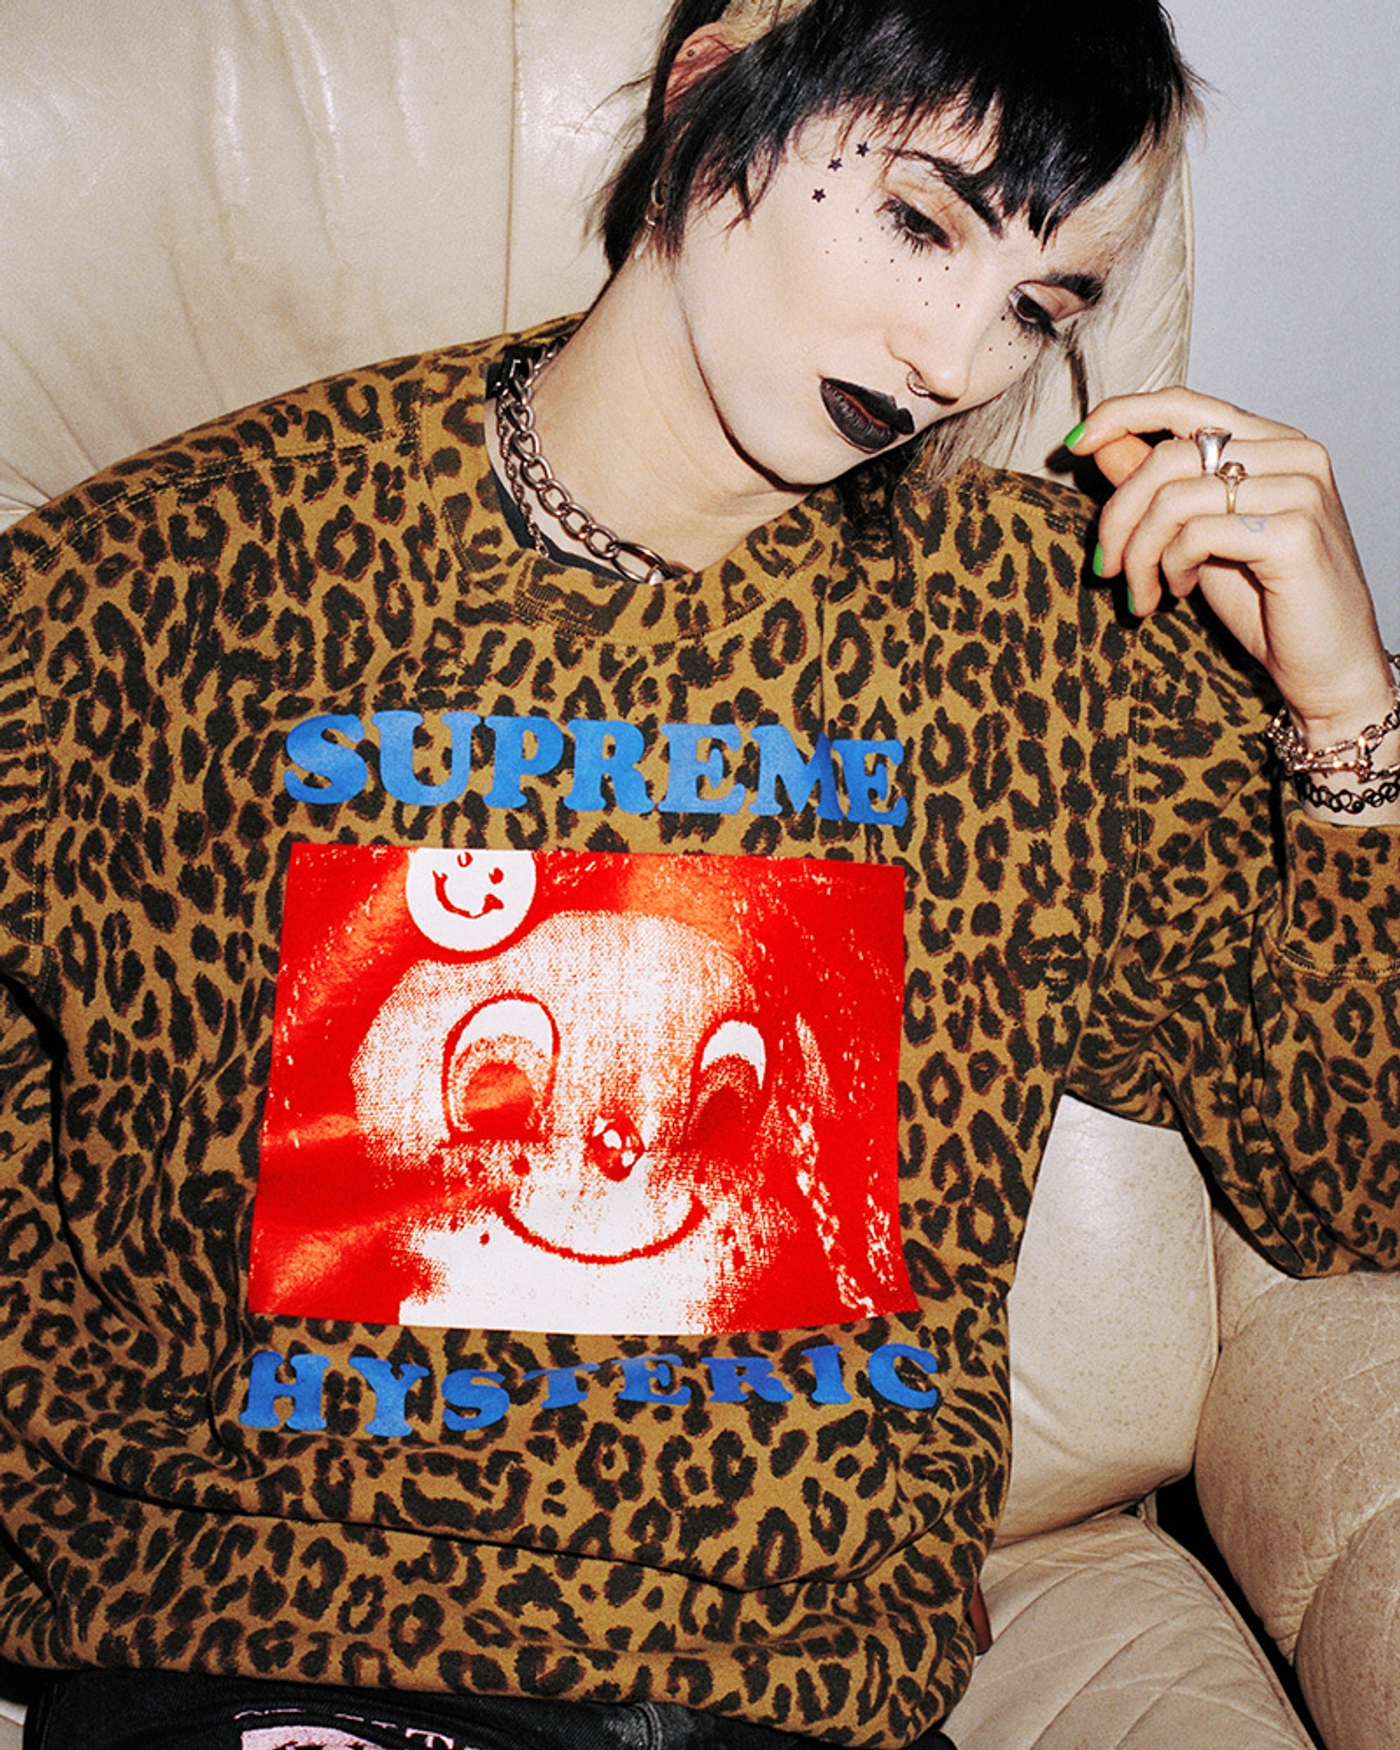 Supreme®/HYSTERIC GLAMOUR (11) (11/66)